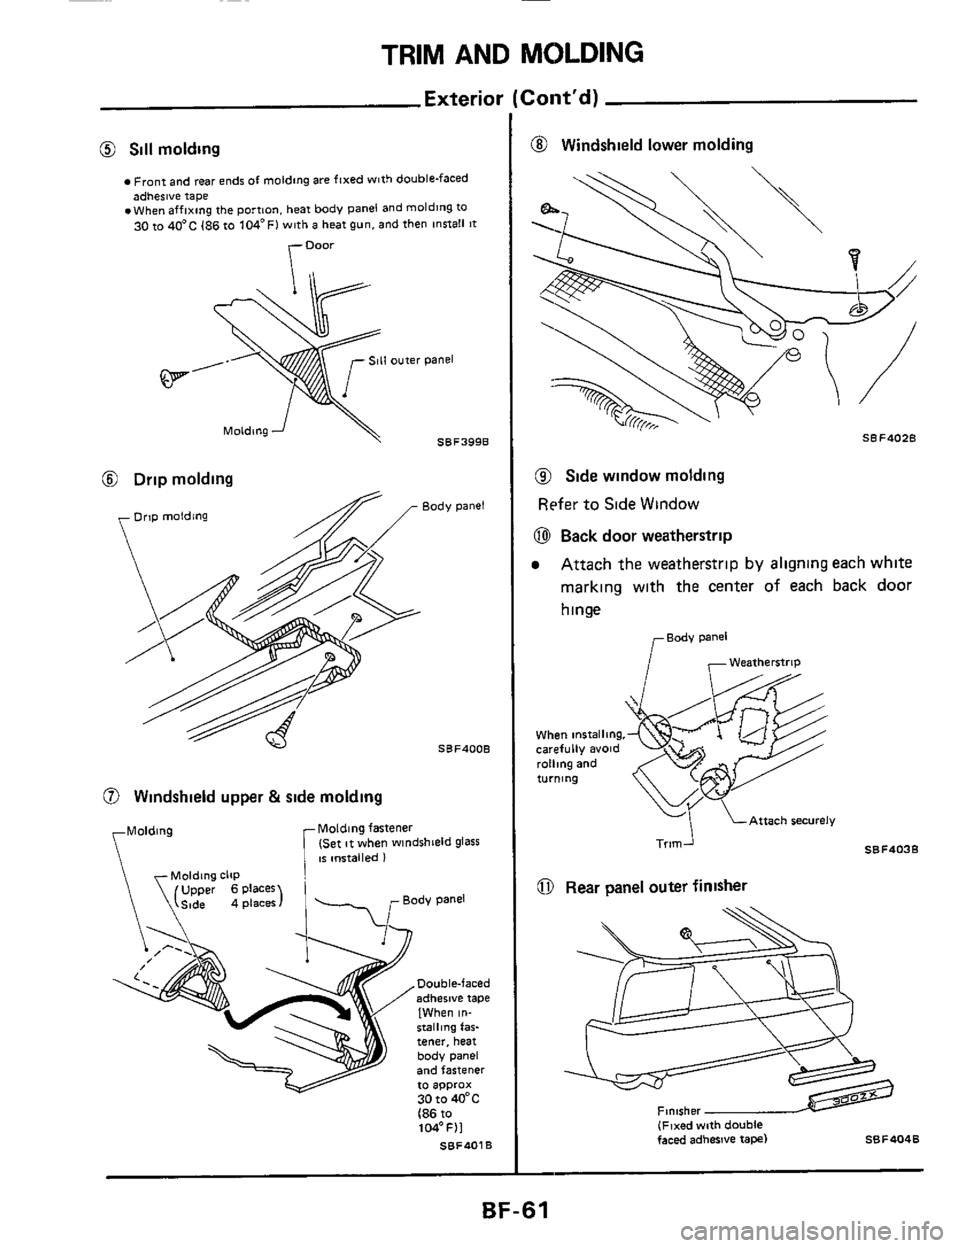 NISSAN 300ZX 1984 Z31 Body Workshop Manual TRIM AND MOLDING 
Exterioi 
@ Sill molding 
Front  and rear  ends  of molding  are fixed  with double-faced 
.When  affixing  the portion,  heat body  panel  and moldlng 
to adhesive  tape 
30 to 40C